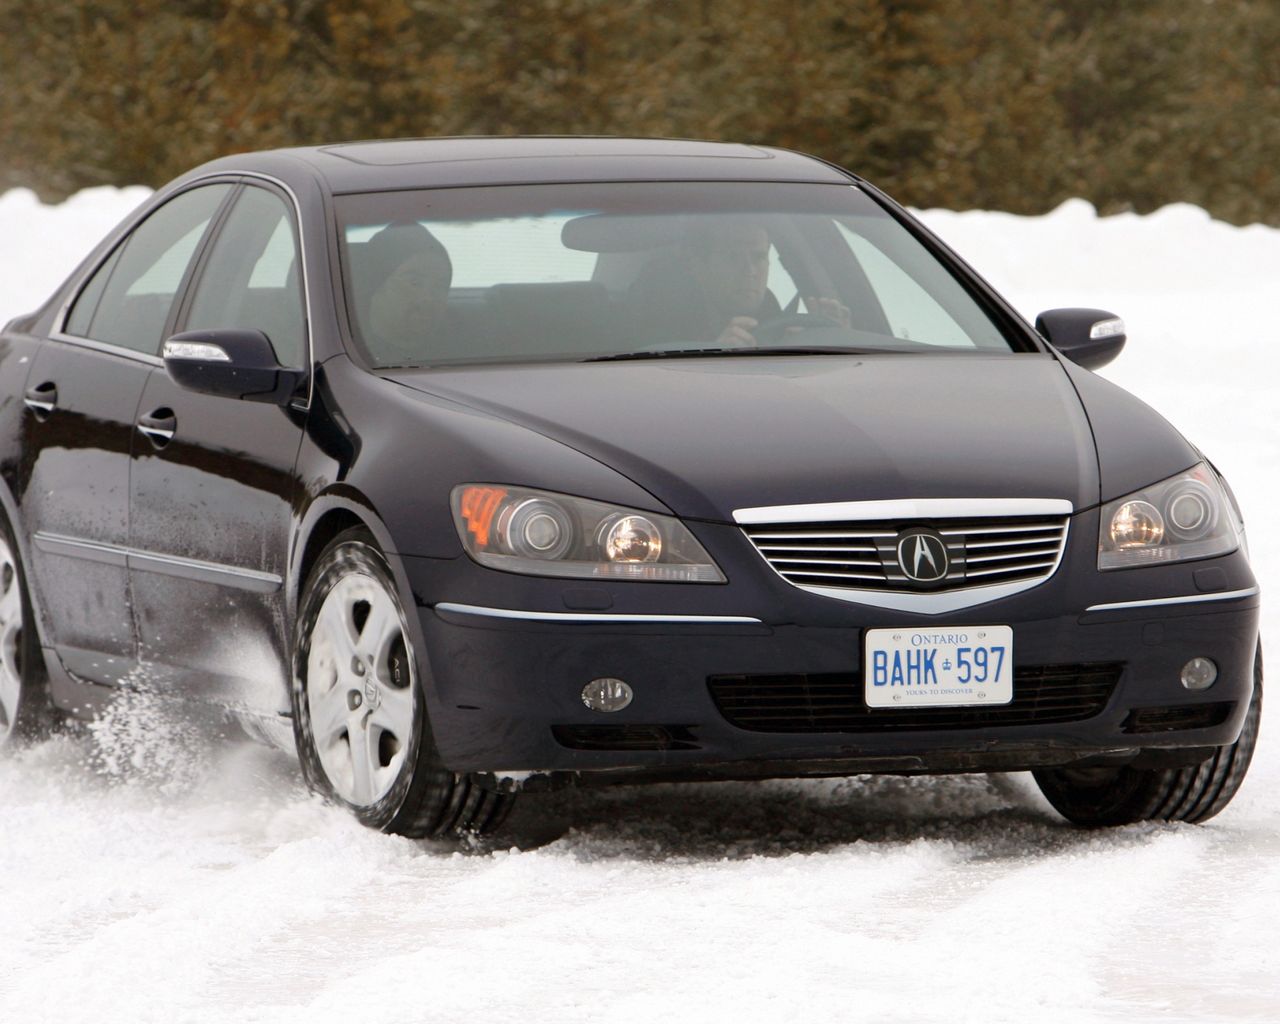 Acura Rl Wallpapers